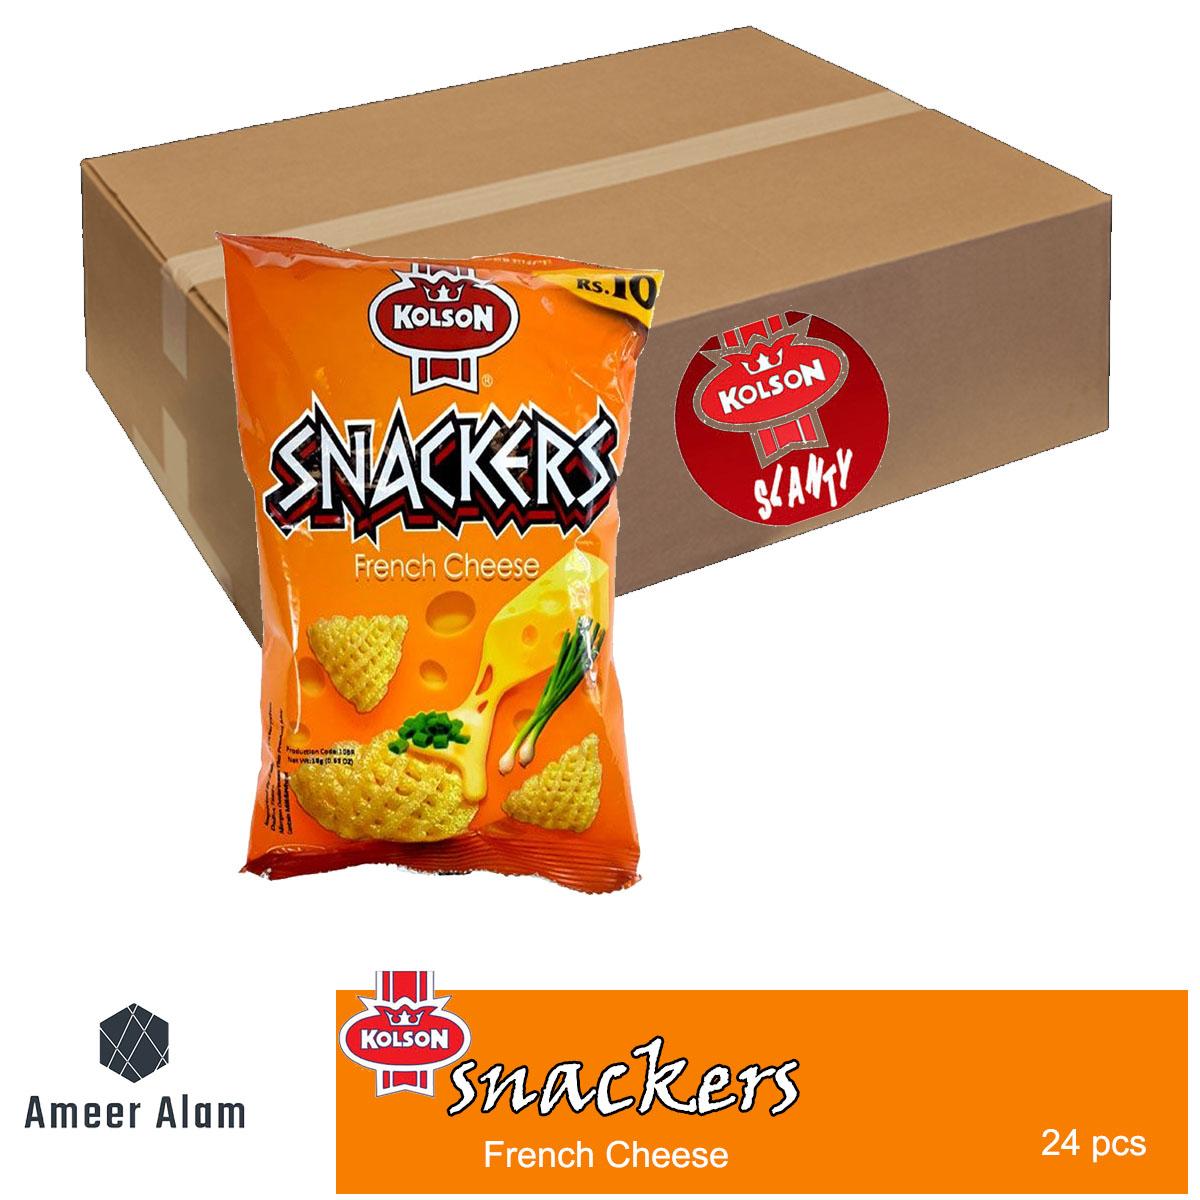 Snackers French Cheese - 18g - 24pcs